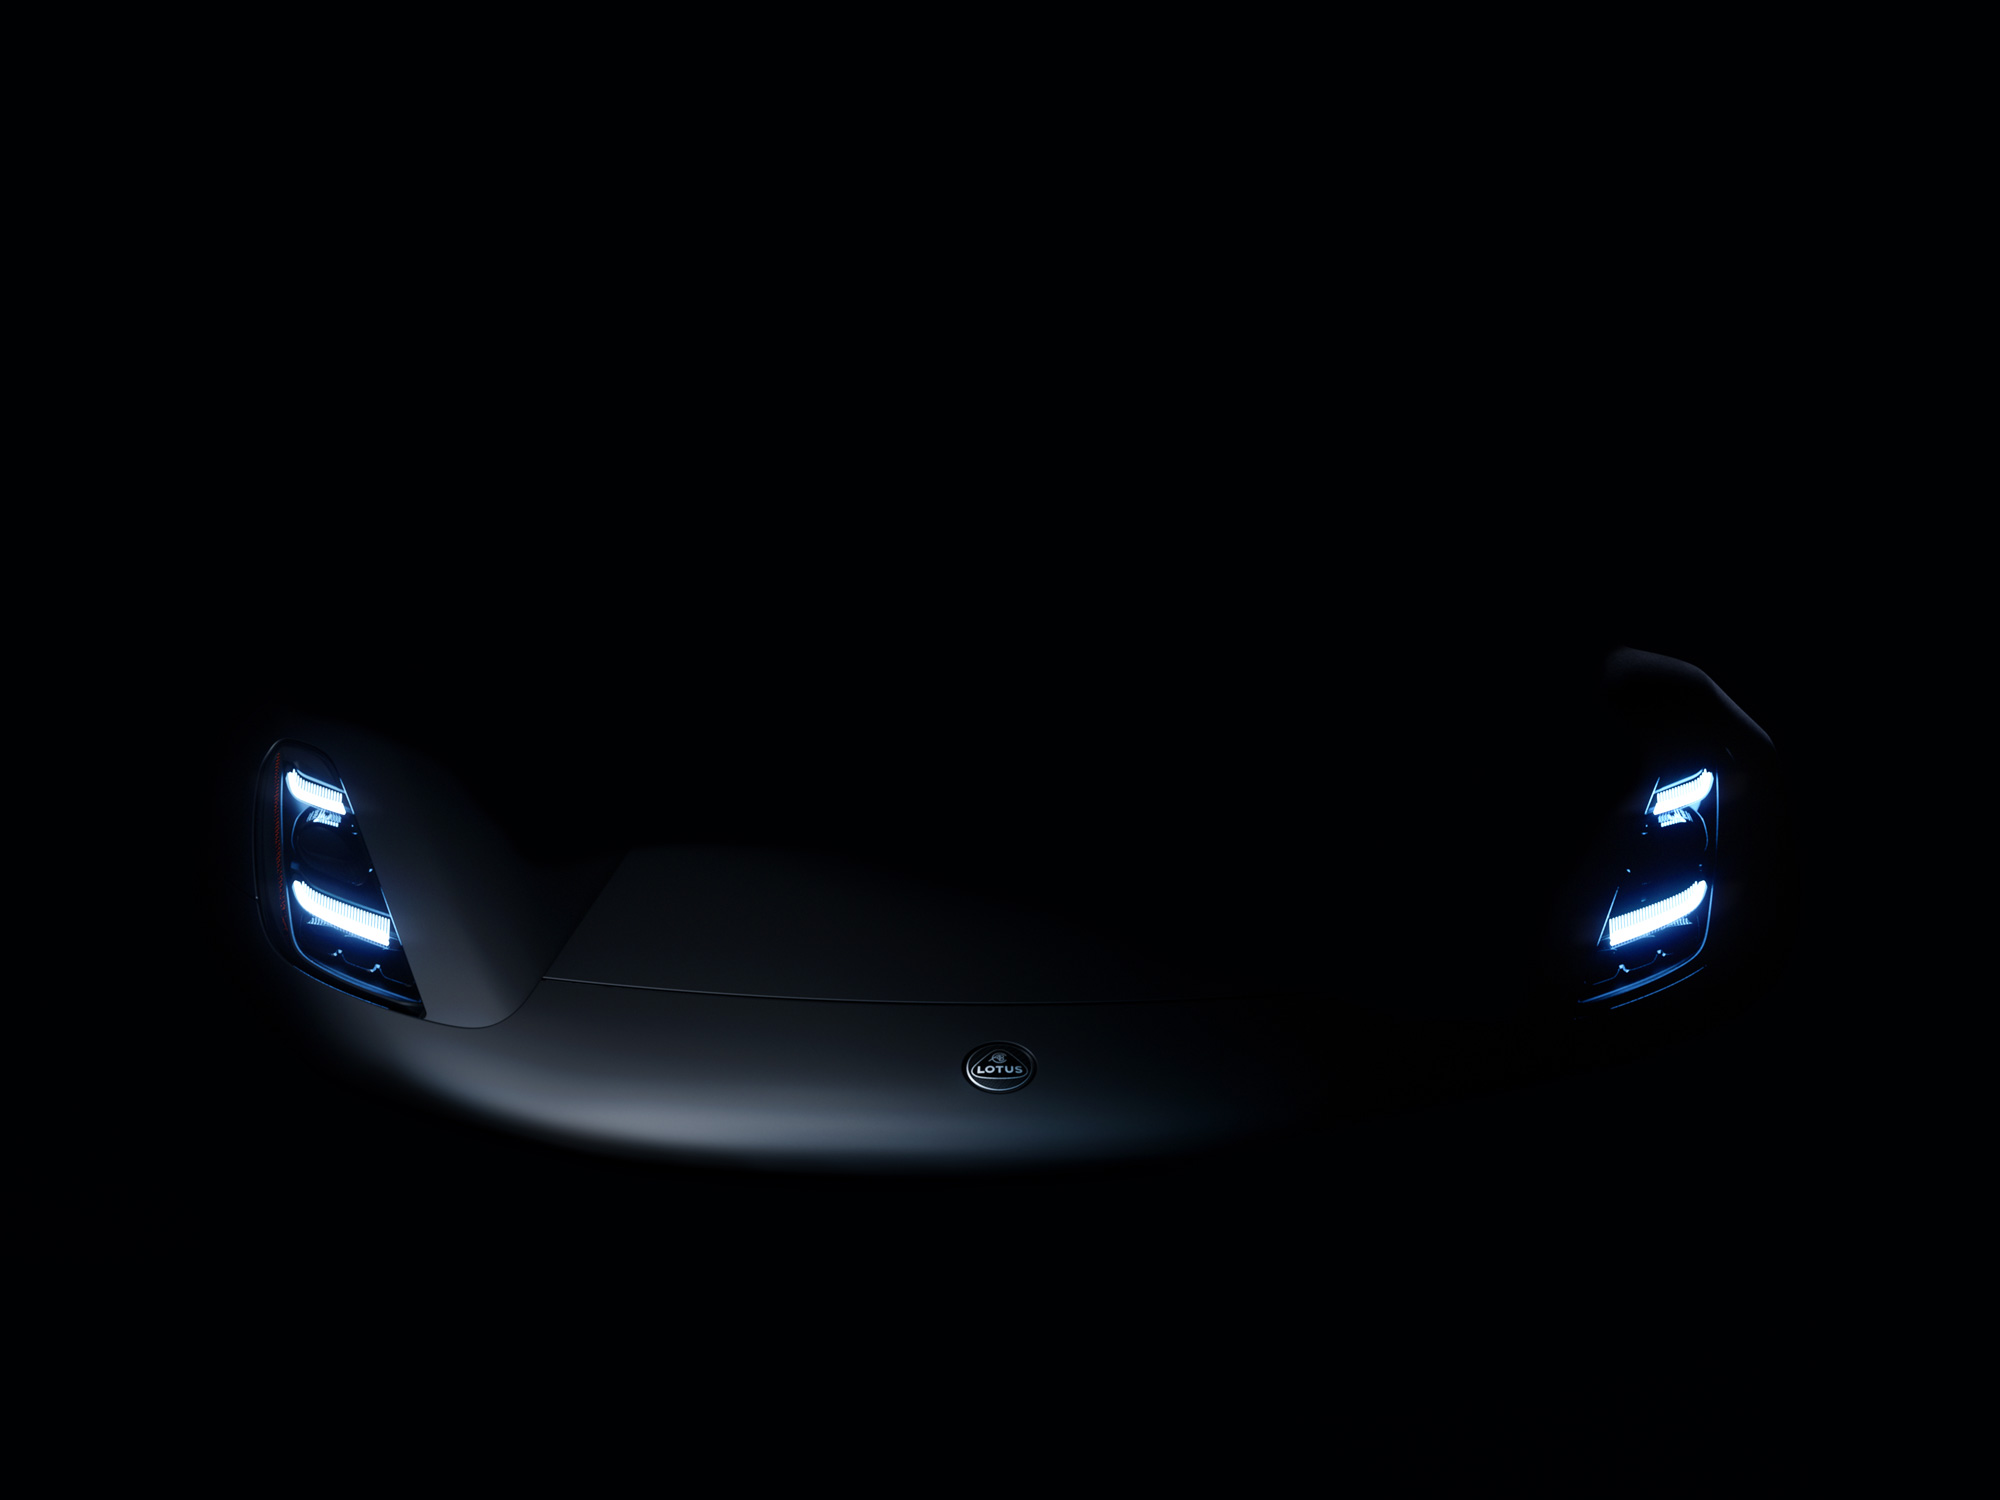 Teaser images of the new Lotus Emira released by the automaker.